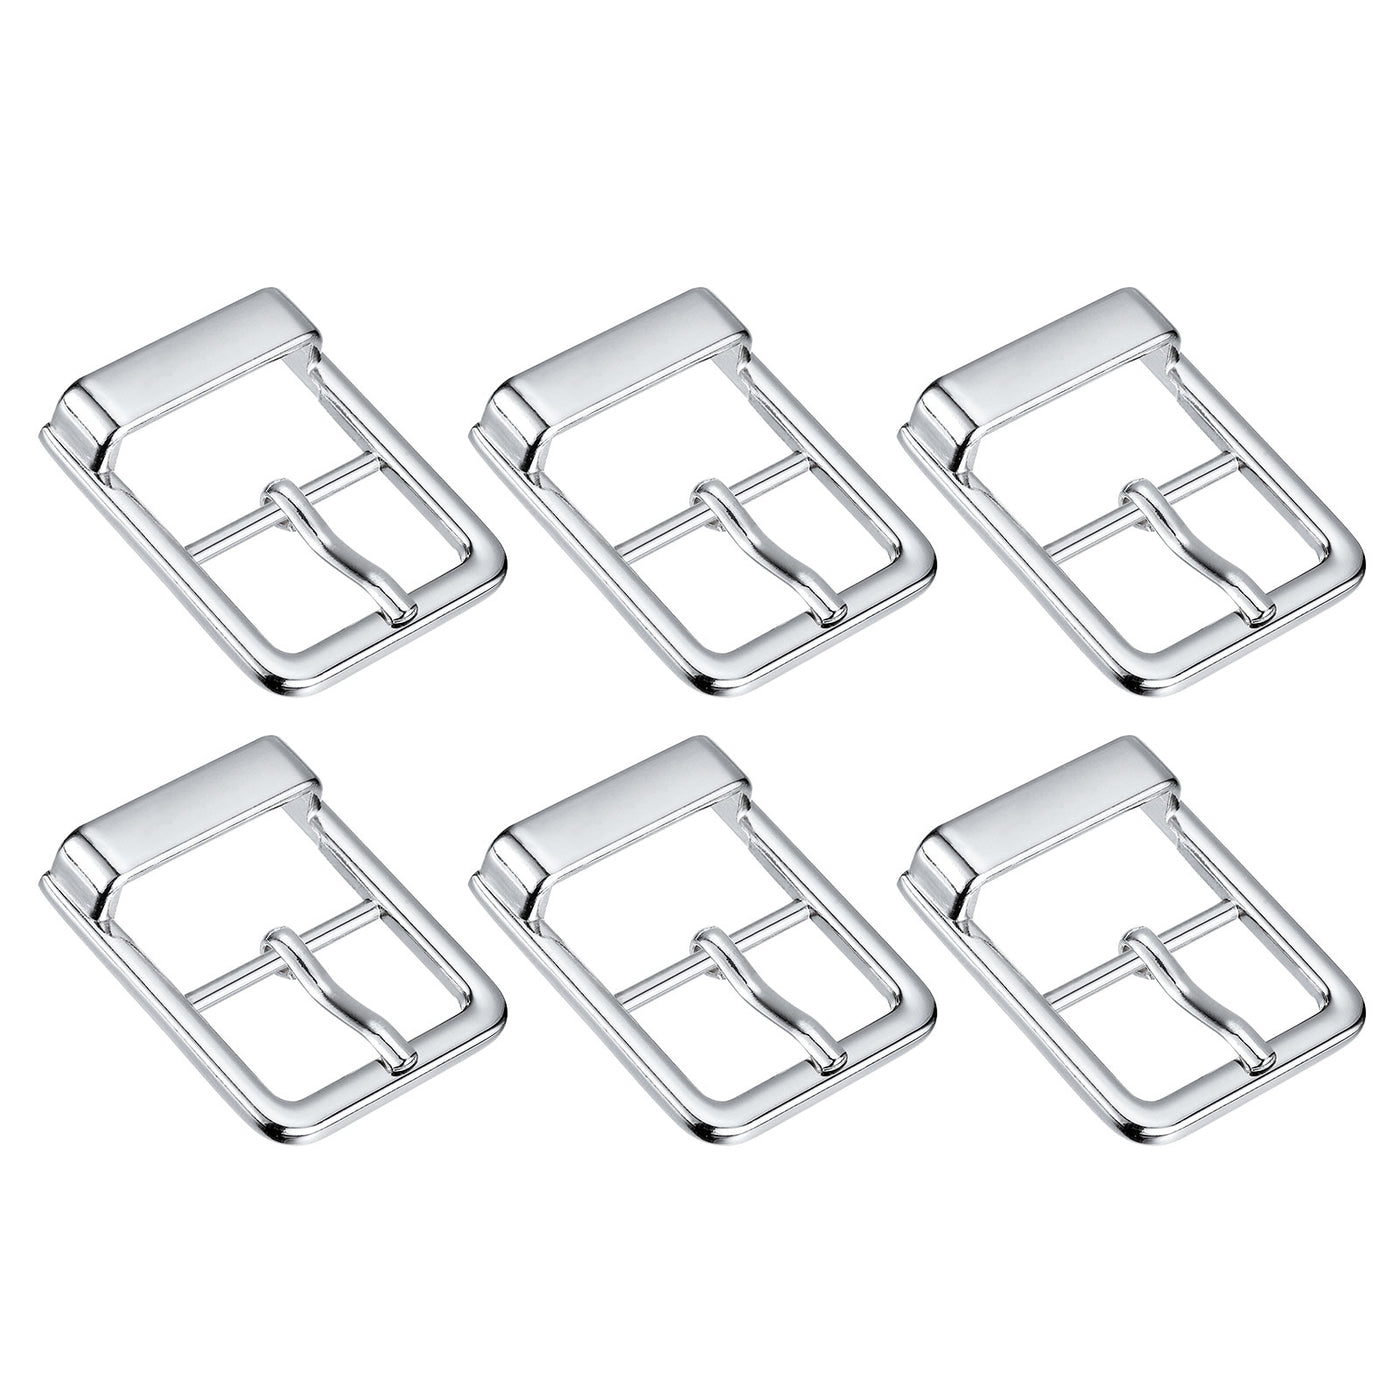 uxcell Uxcell 6Pcs 0.94" Single Prong Belt Buckle Square Center Bar Buckles for Belt, White